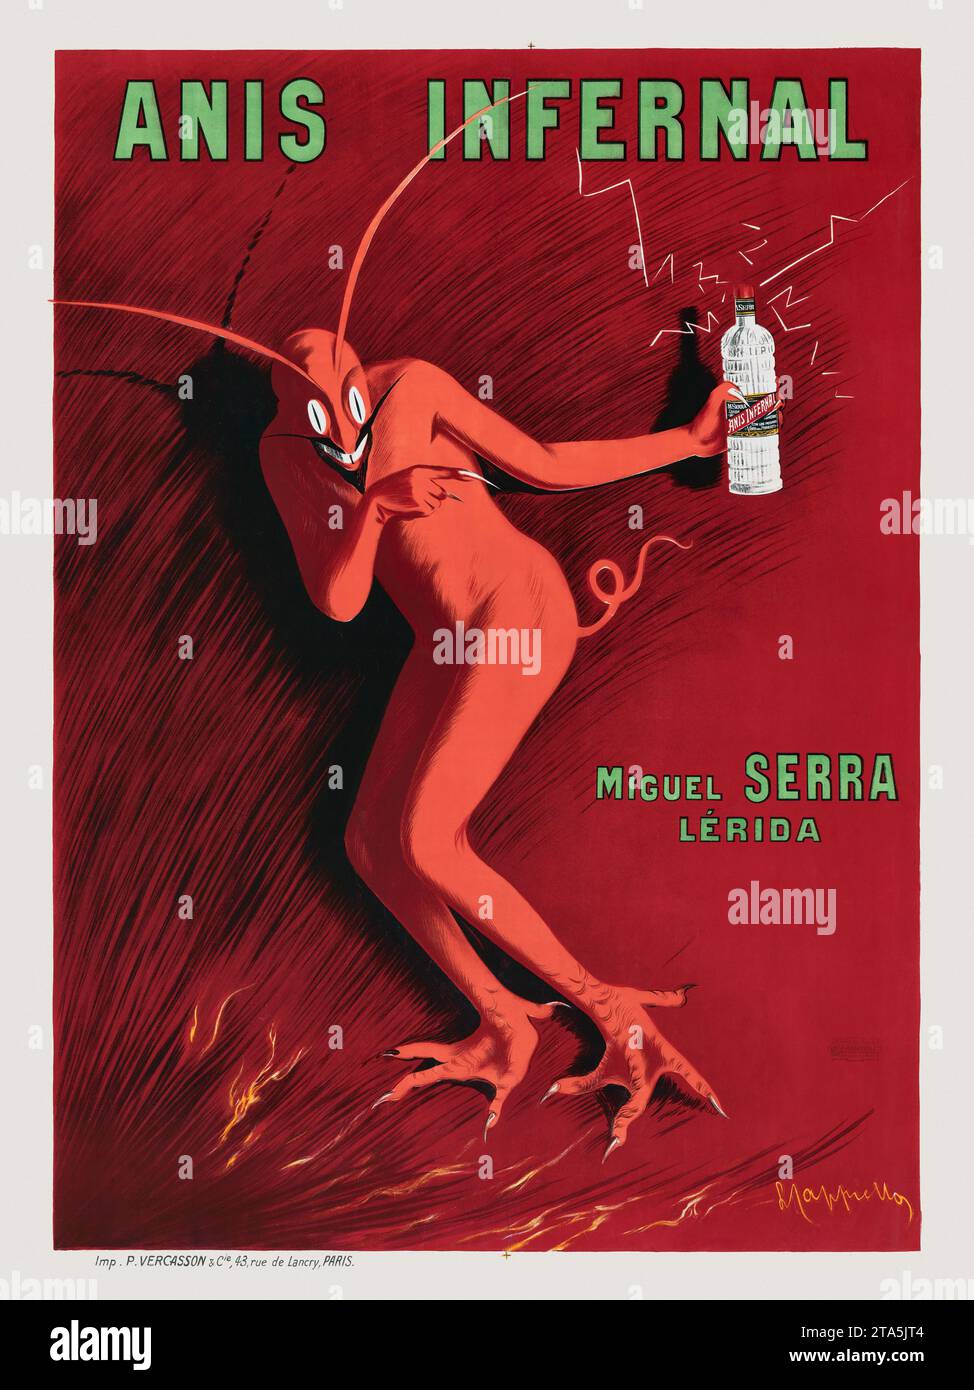 Anis Infernal. Miguel Serra Lerida by Leonetto Cappiello (1875-1942). Published in 1905 in France. Stock Photo